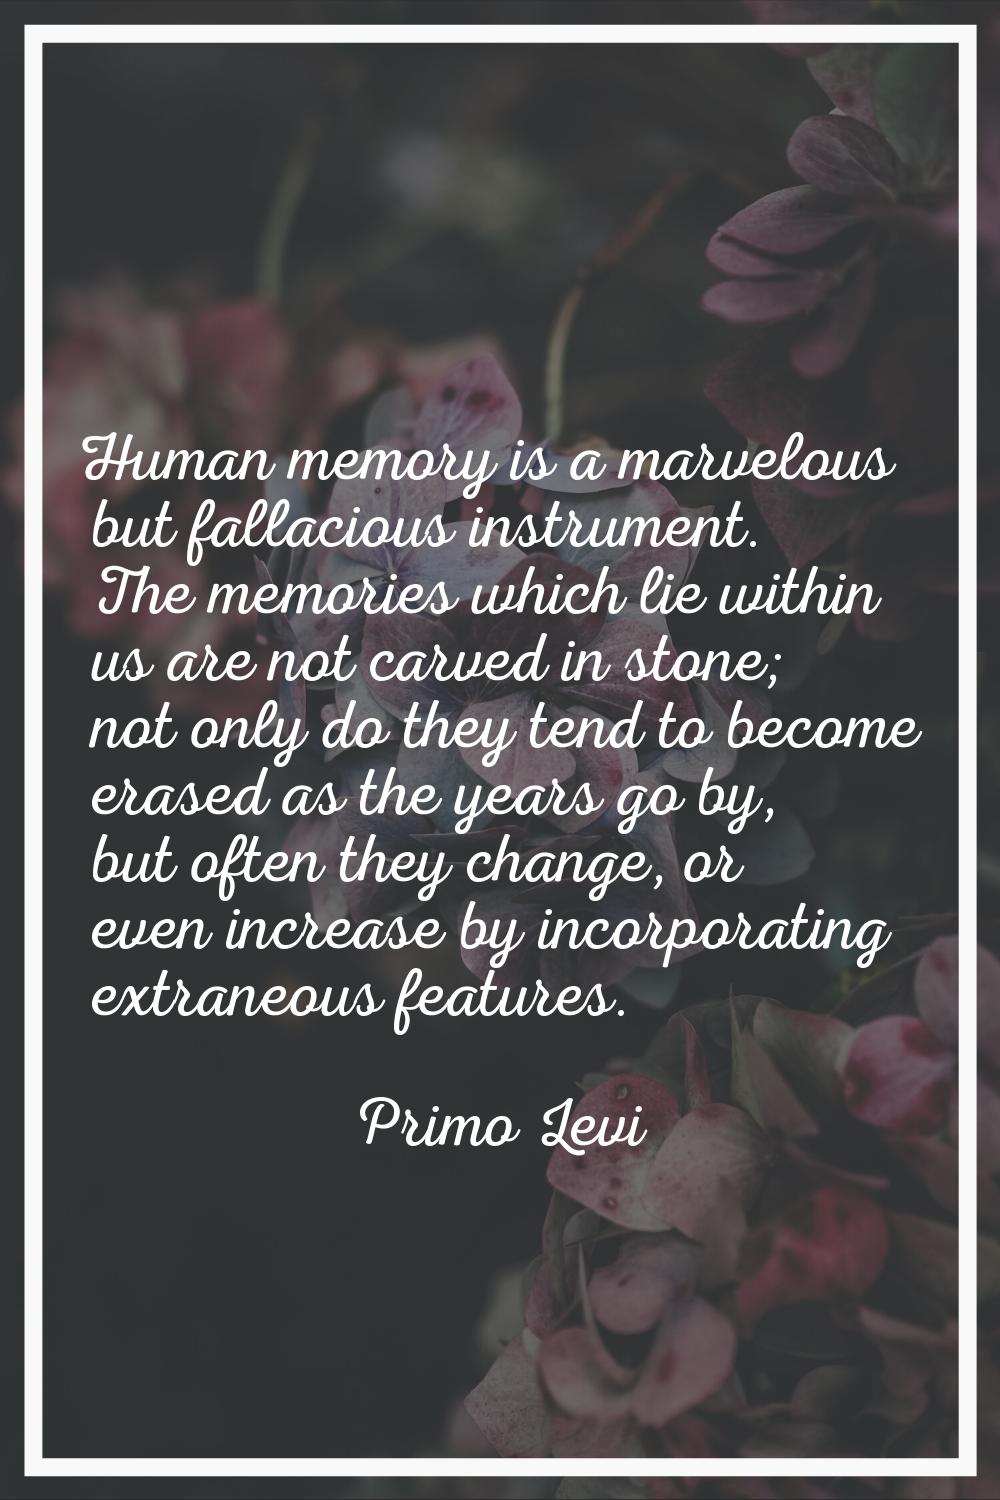 Human memory is a marvelous but fallacious instrument. The memories which lie within us are not car